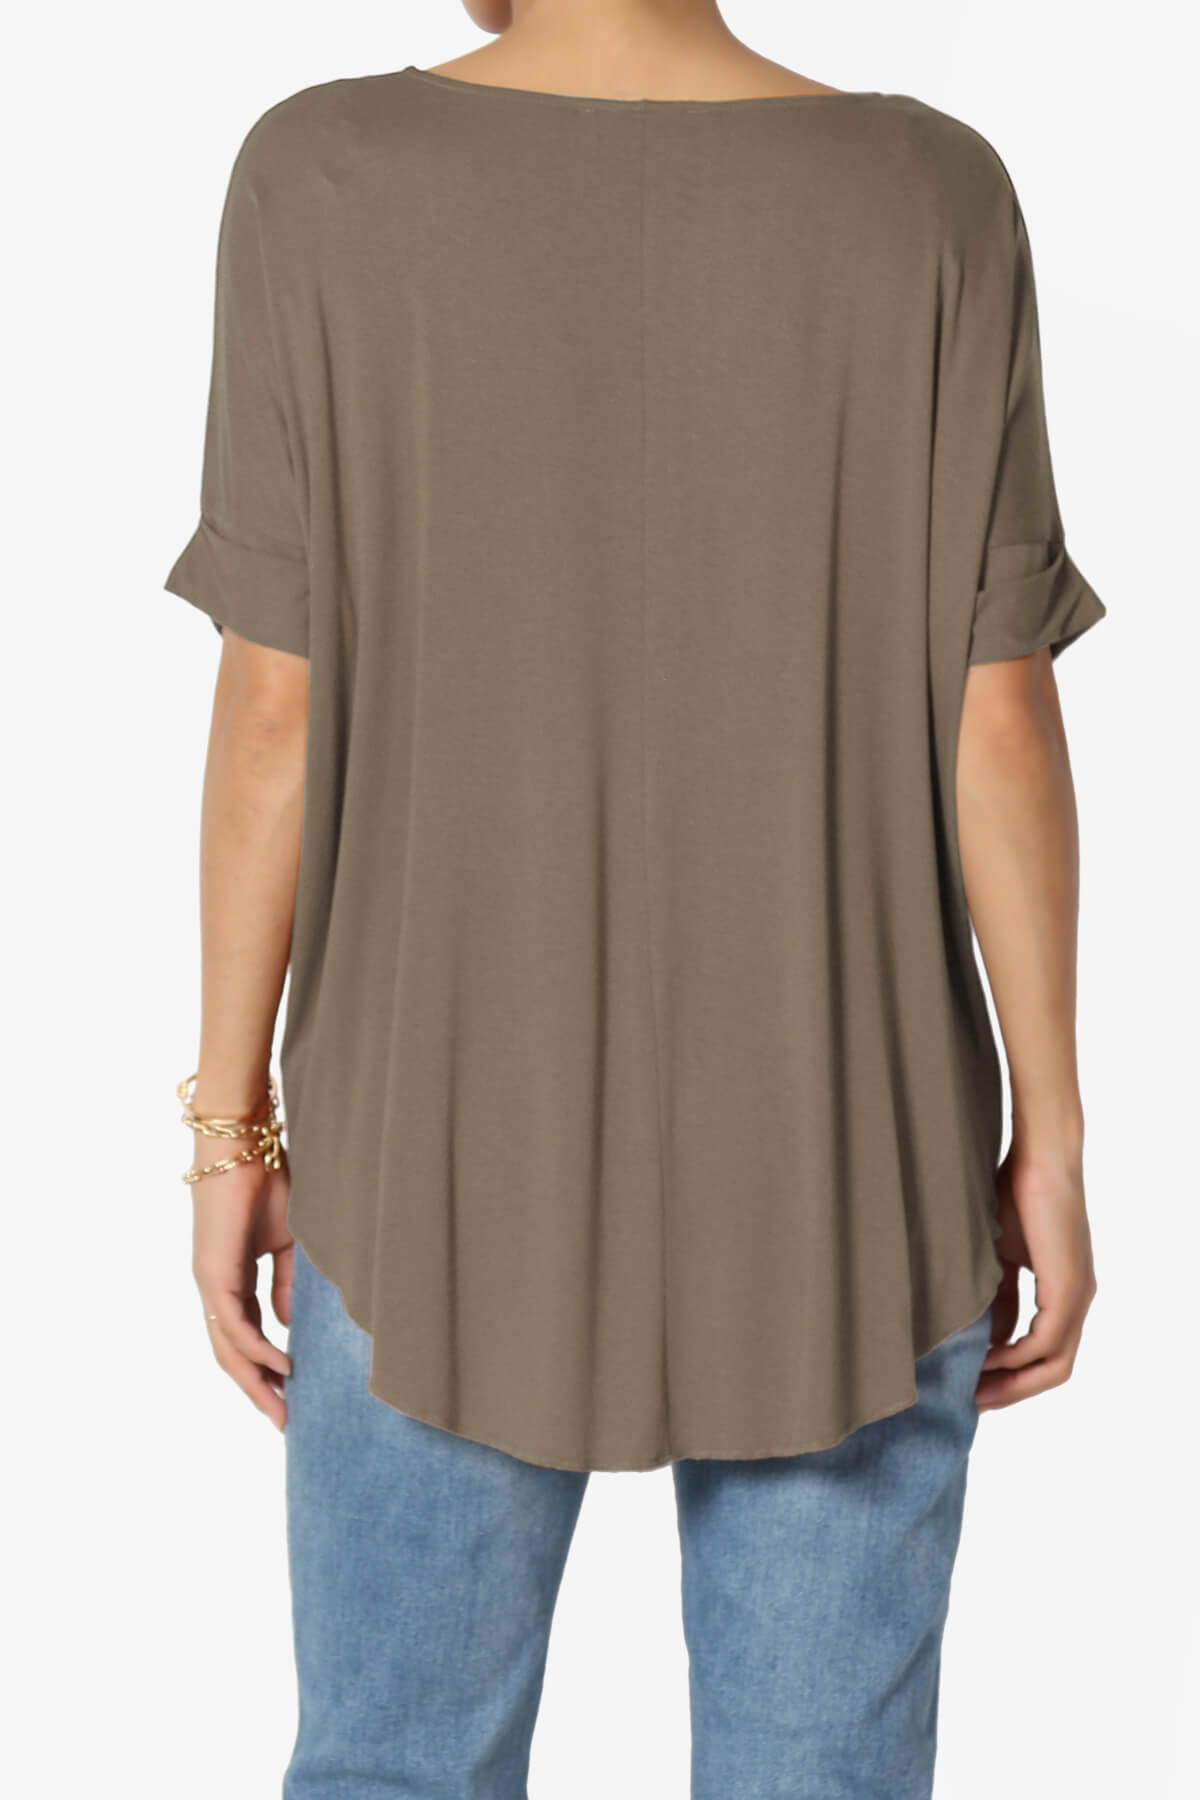 Load image into Gallery viewer, Tackle Wrap Hi-Low Crepe Knit Top MOCHA_2
